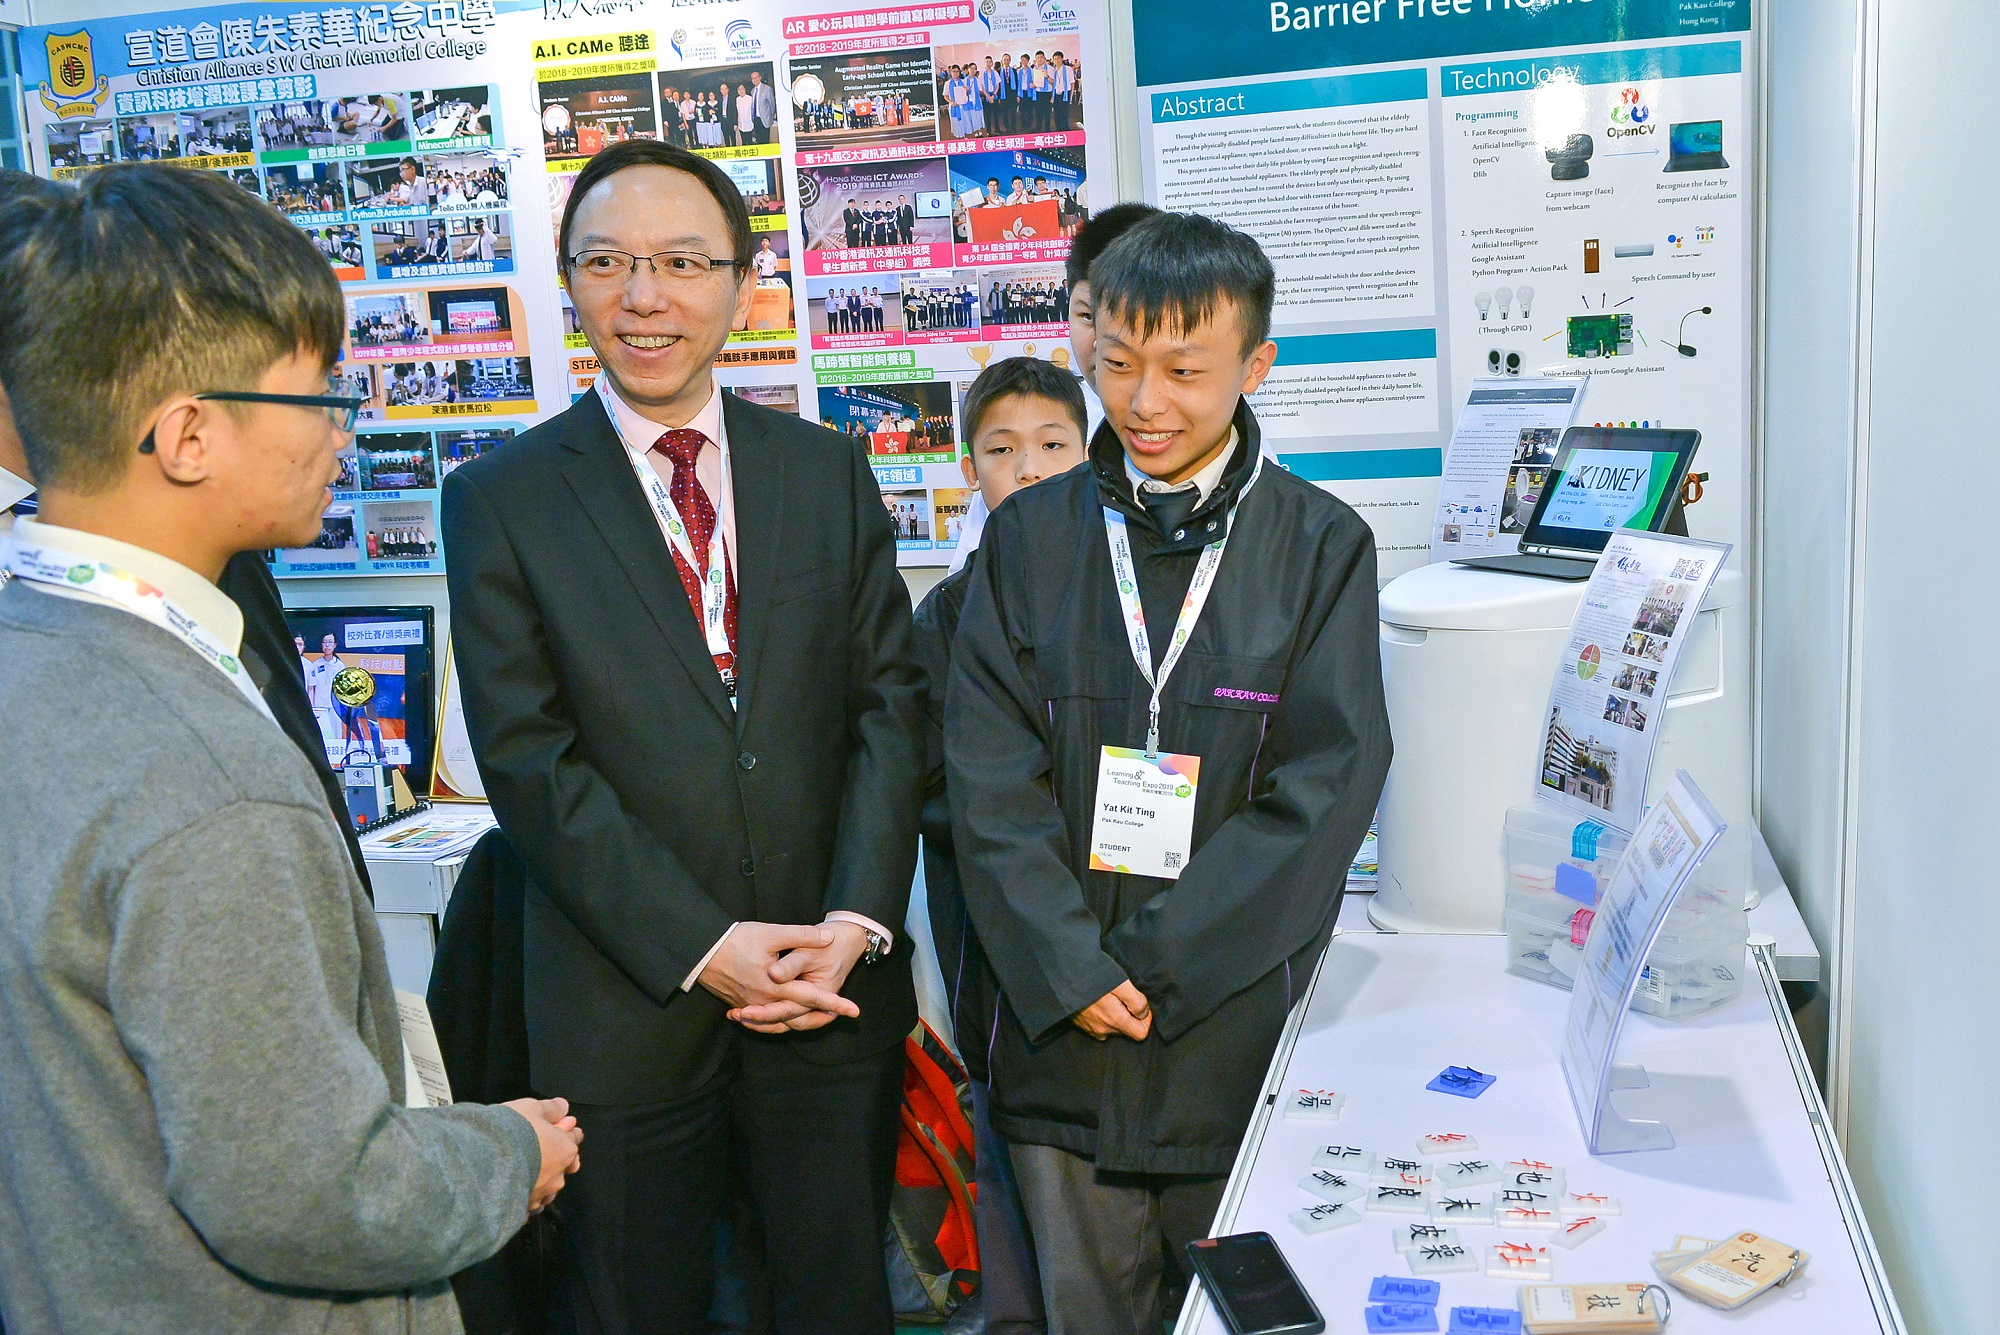 Pak Kau College demonstrated their “Chinese Character Card Game AR”, which won the Secondary School Champion in the Samsung Solve for Tomorrow 2018.